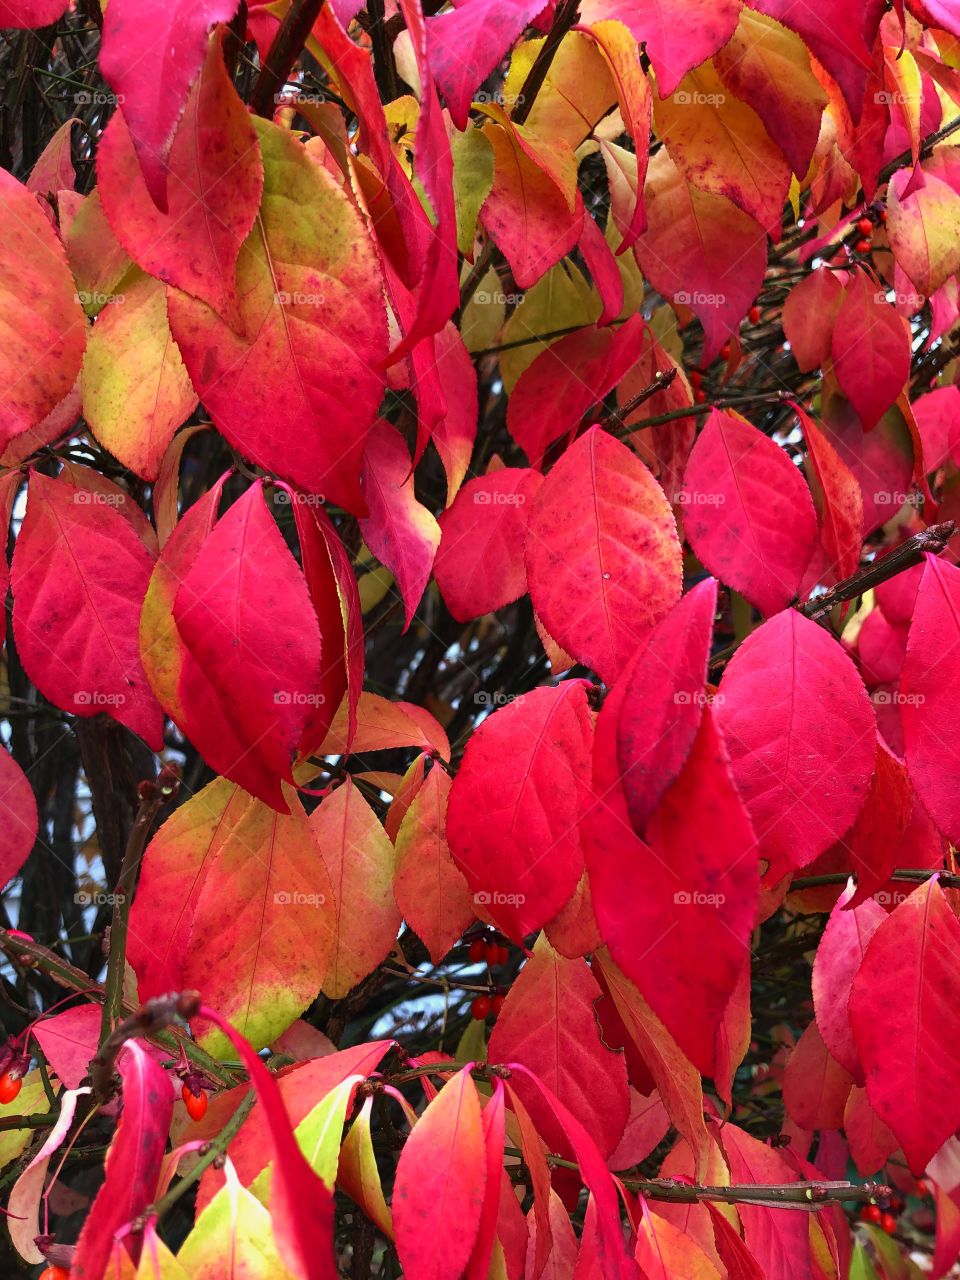 The leaves of the fire bush are so bright and colorful at this time of year. Fall in Maine 